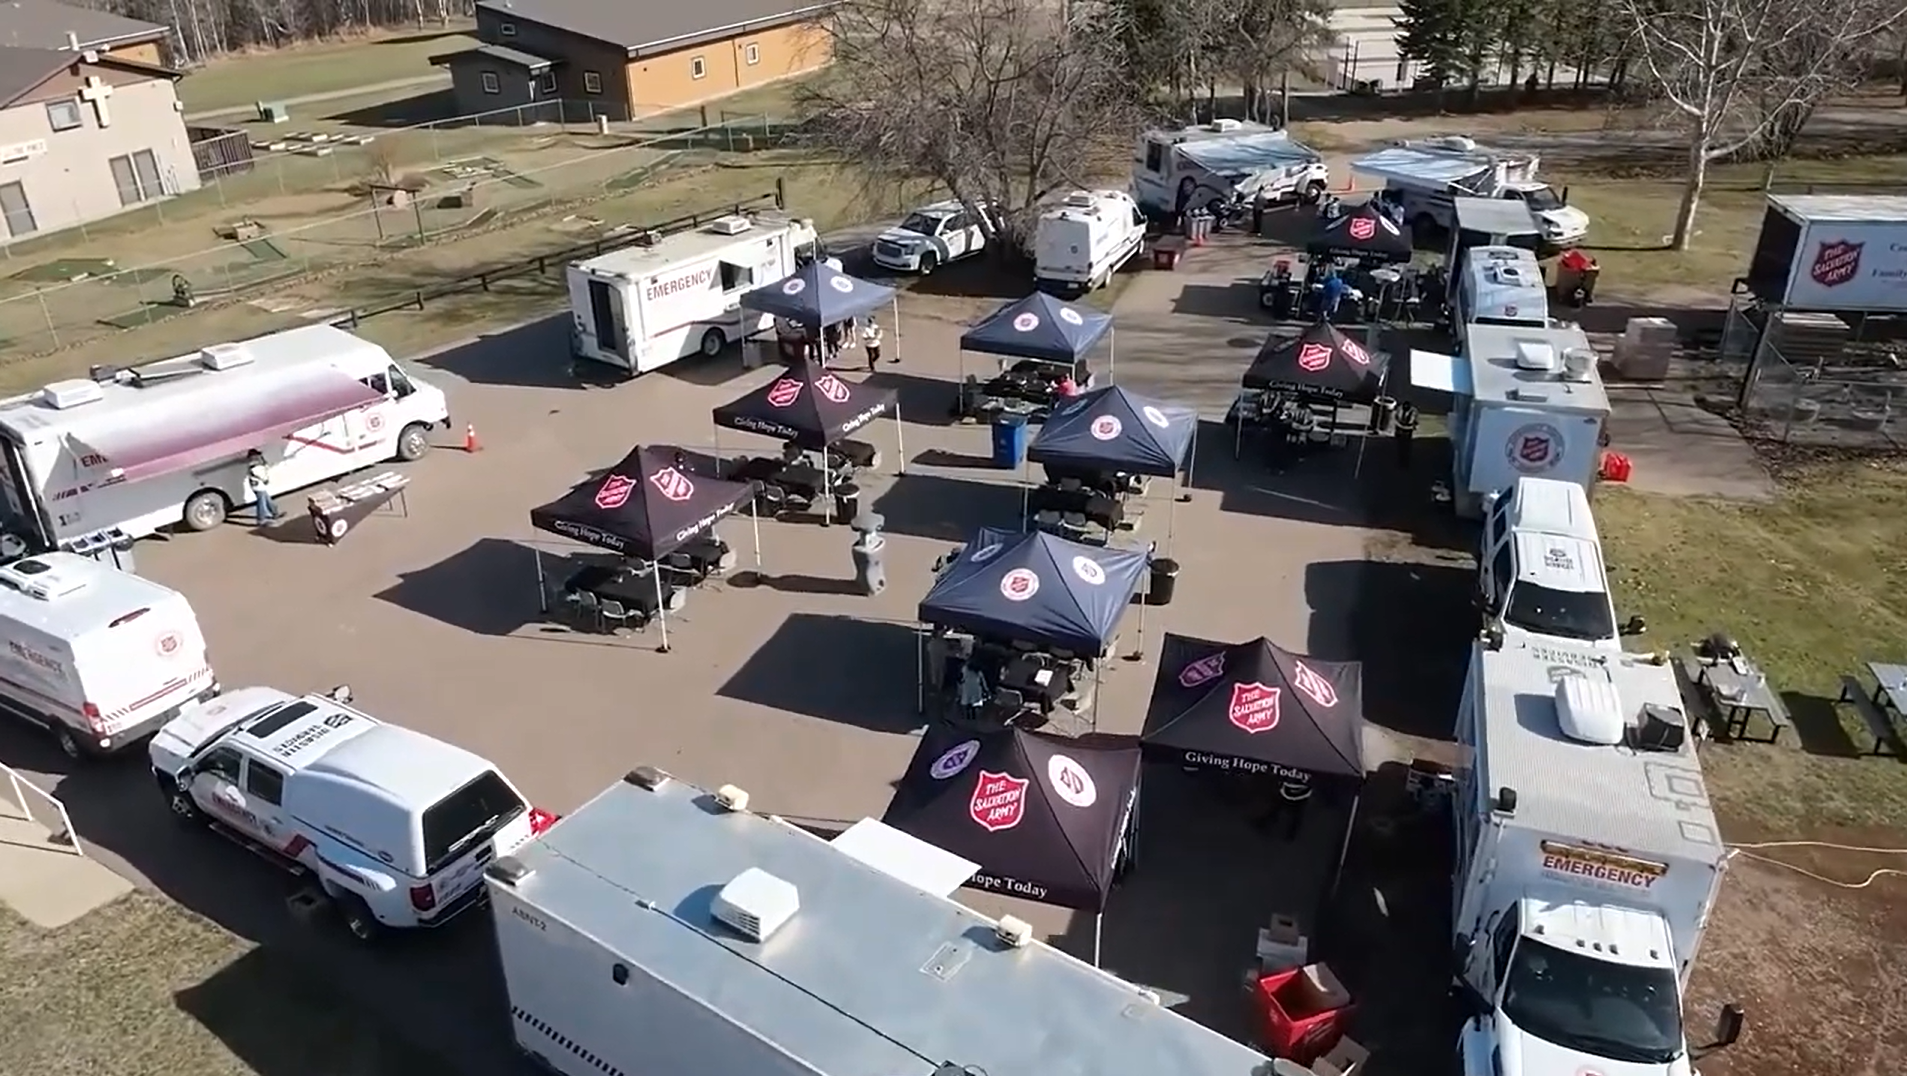 Drone shot of the EDS cookoff